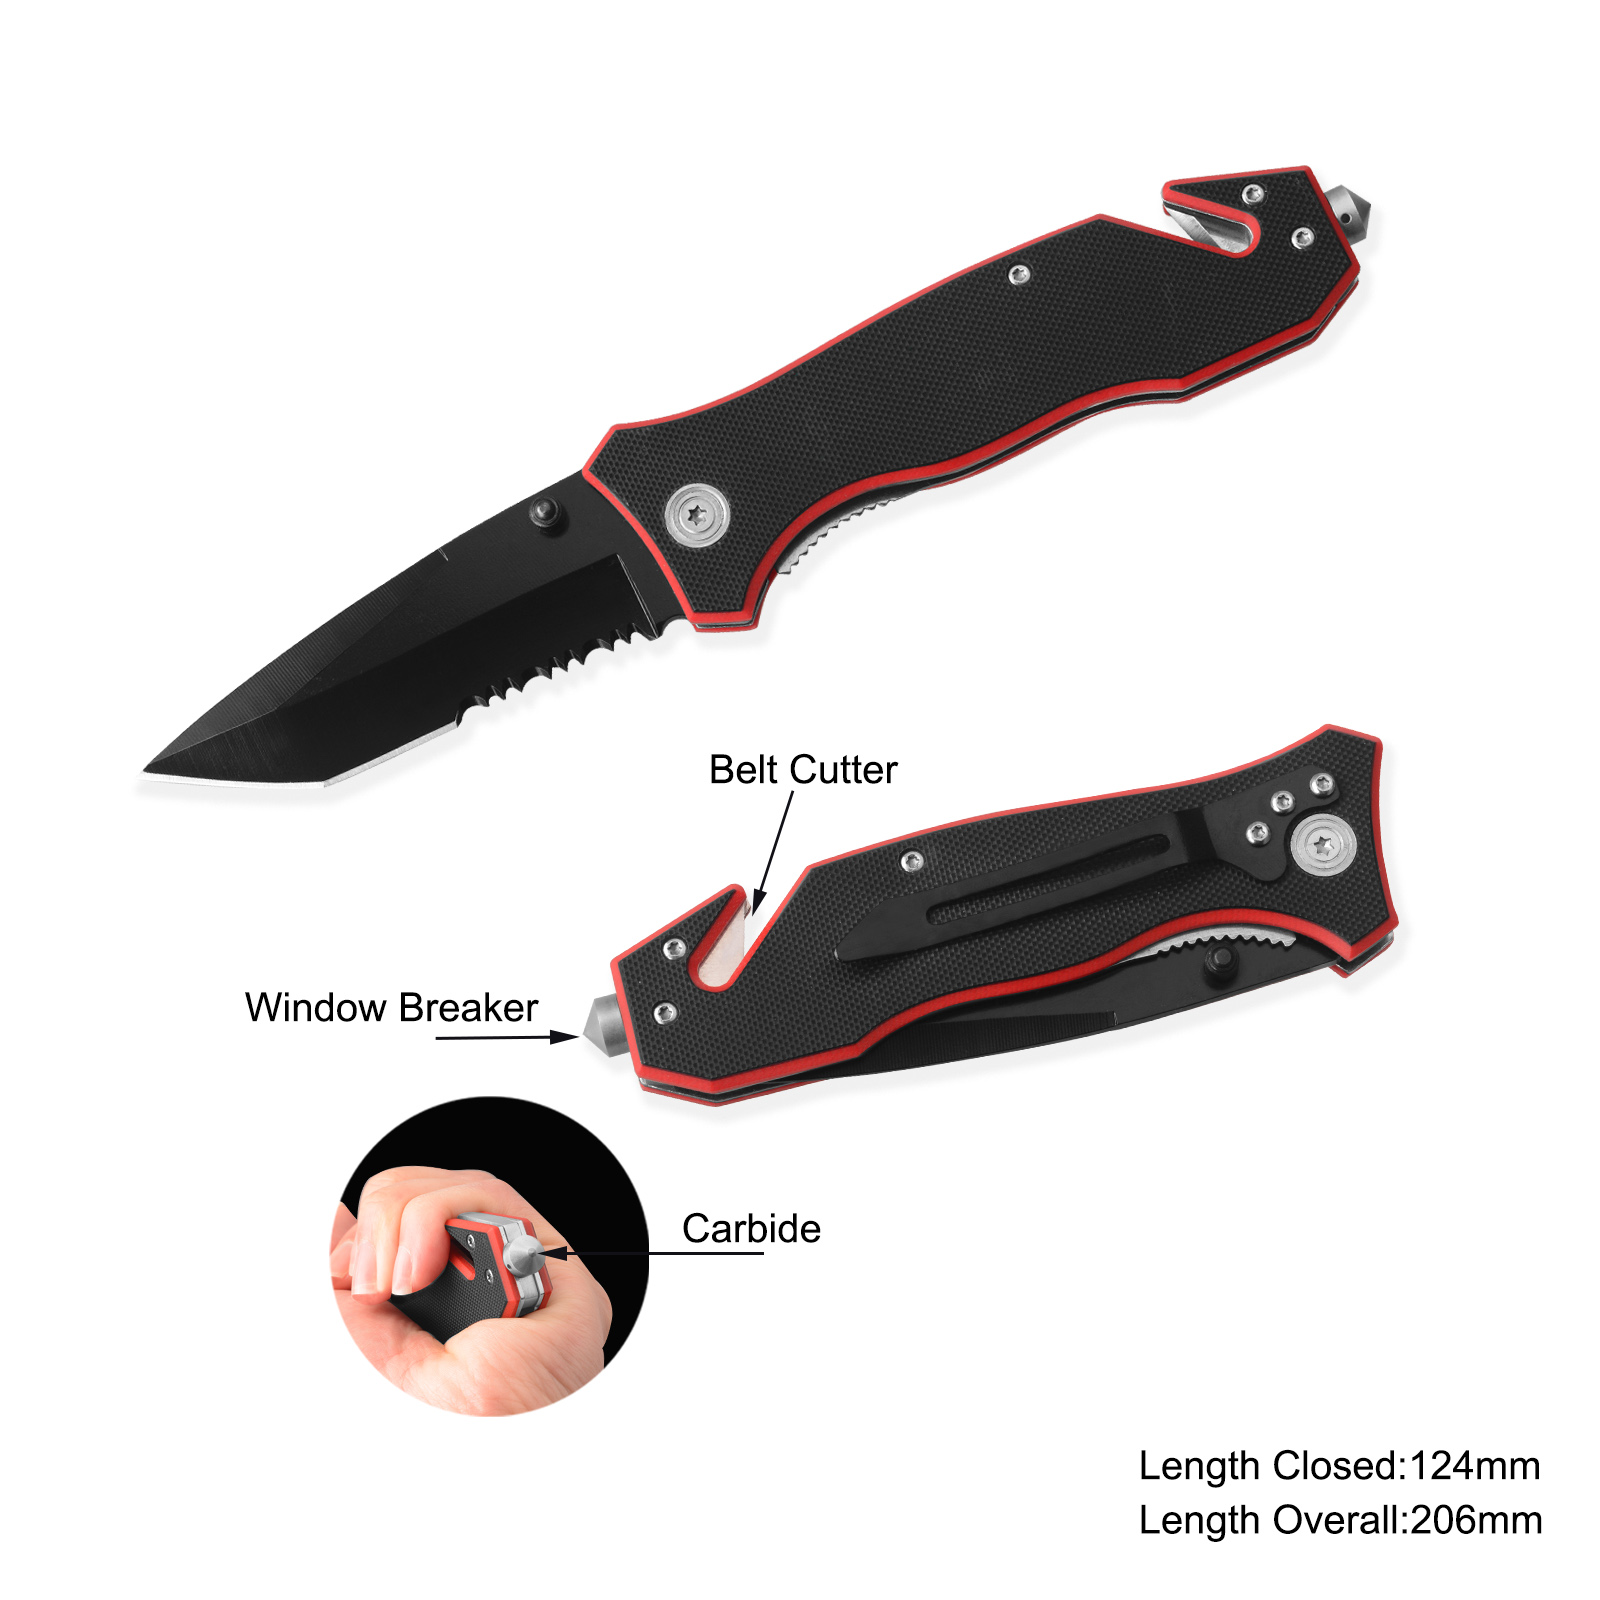 #3332-G10-CBD Survival Knife with Carbide Window Breaker with G10 Handle